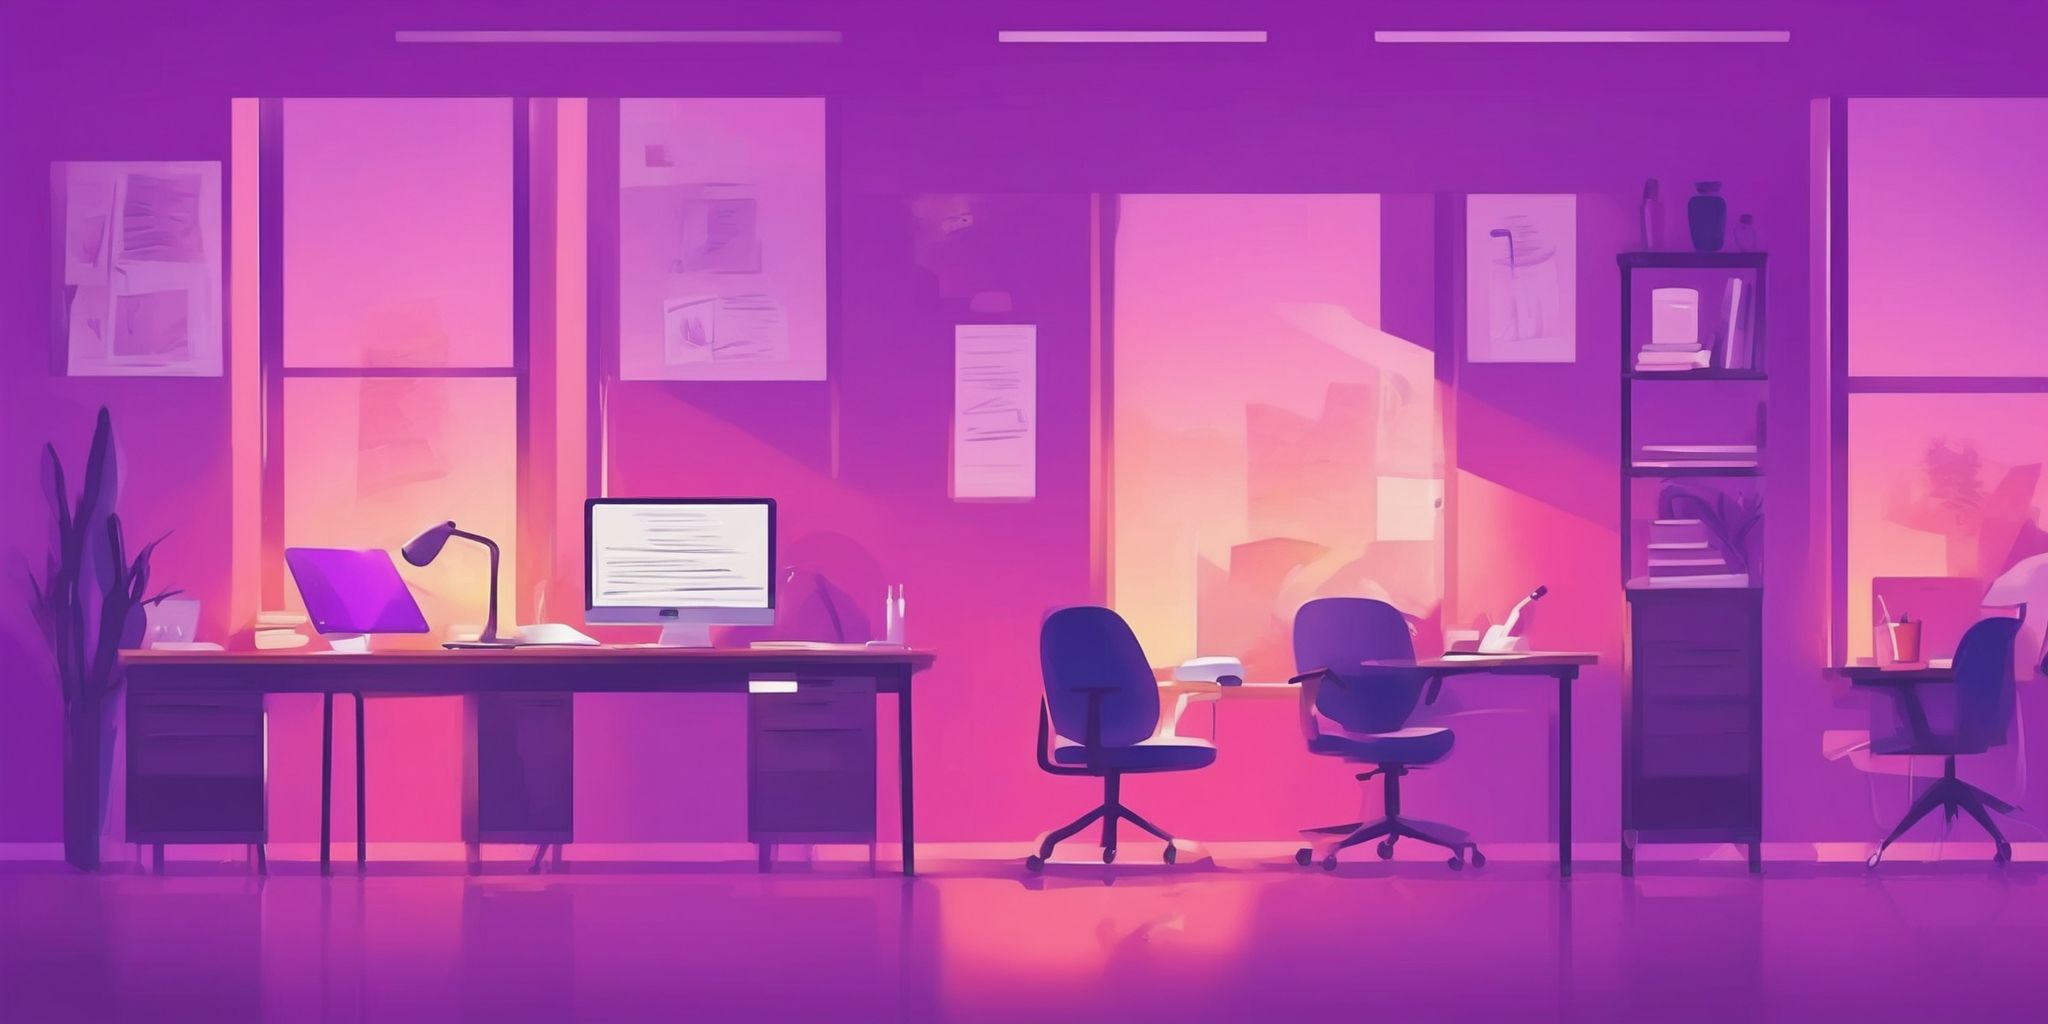 Examination in flat illustration style, colorful purple gradient colors